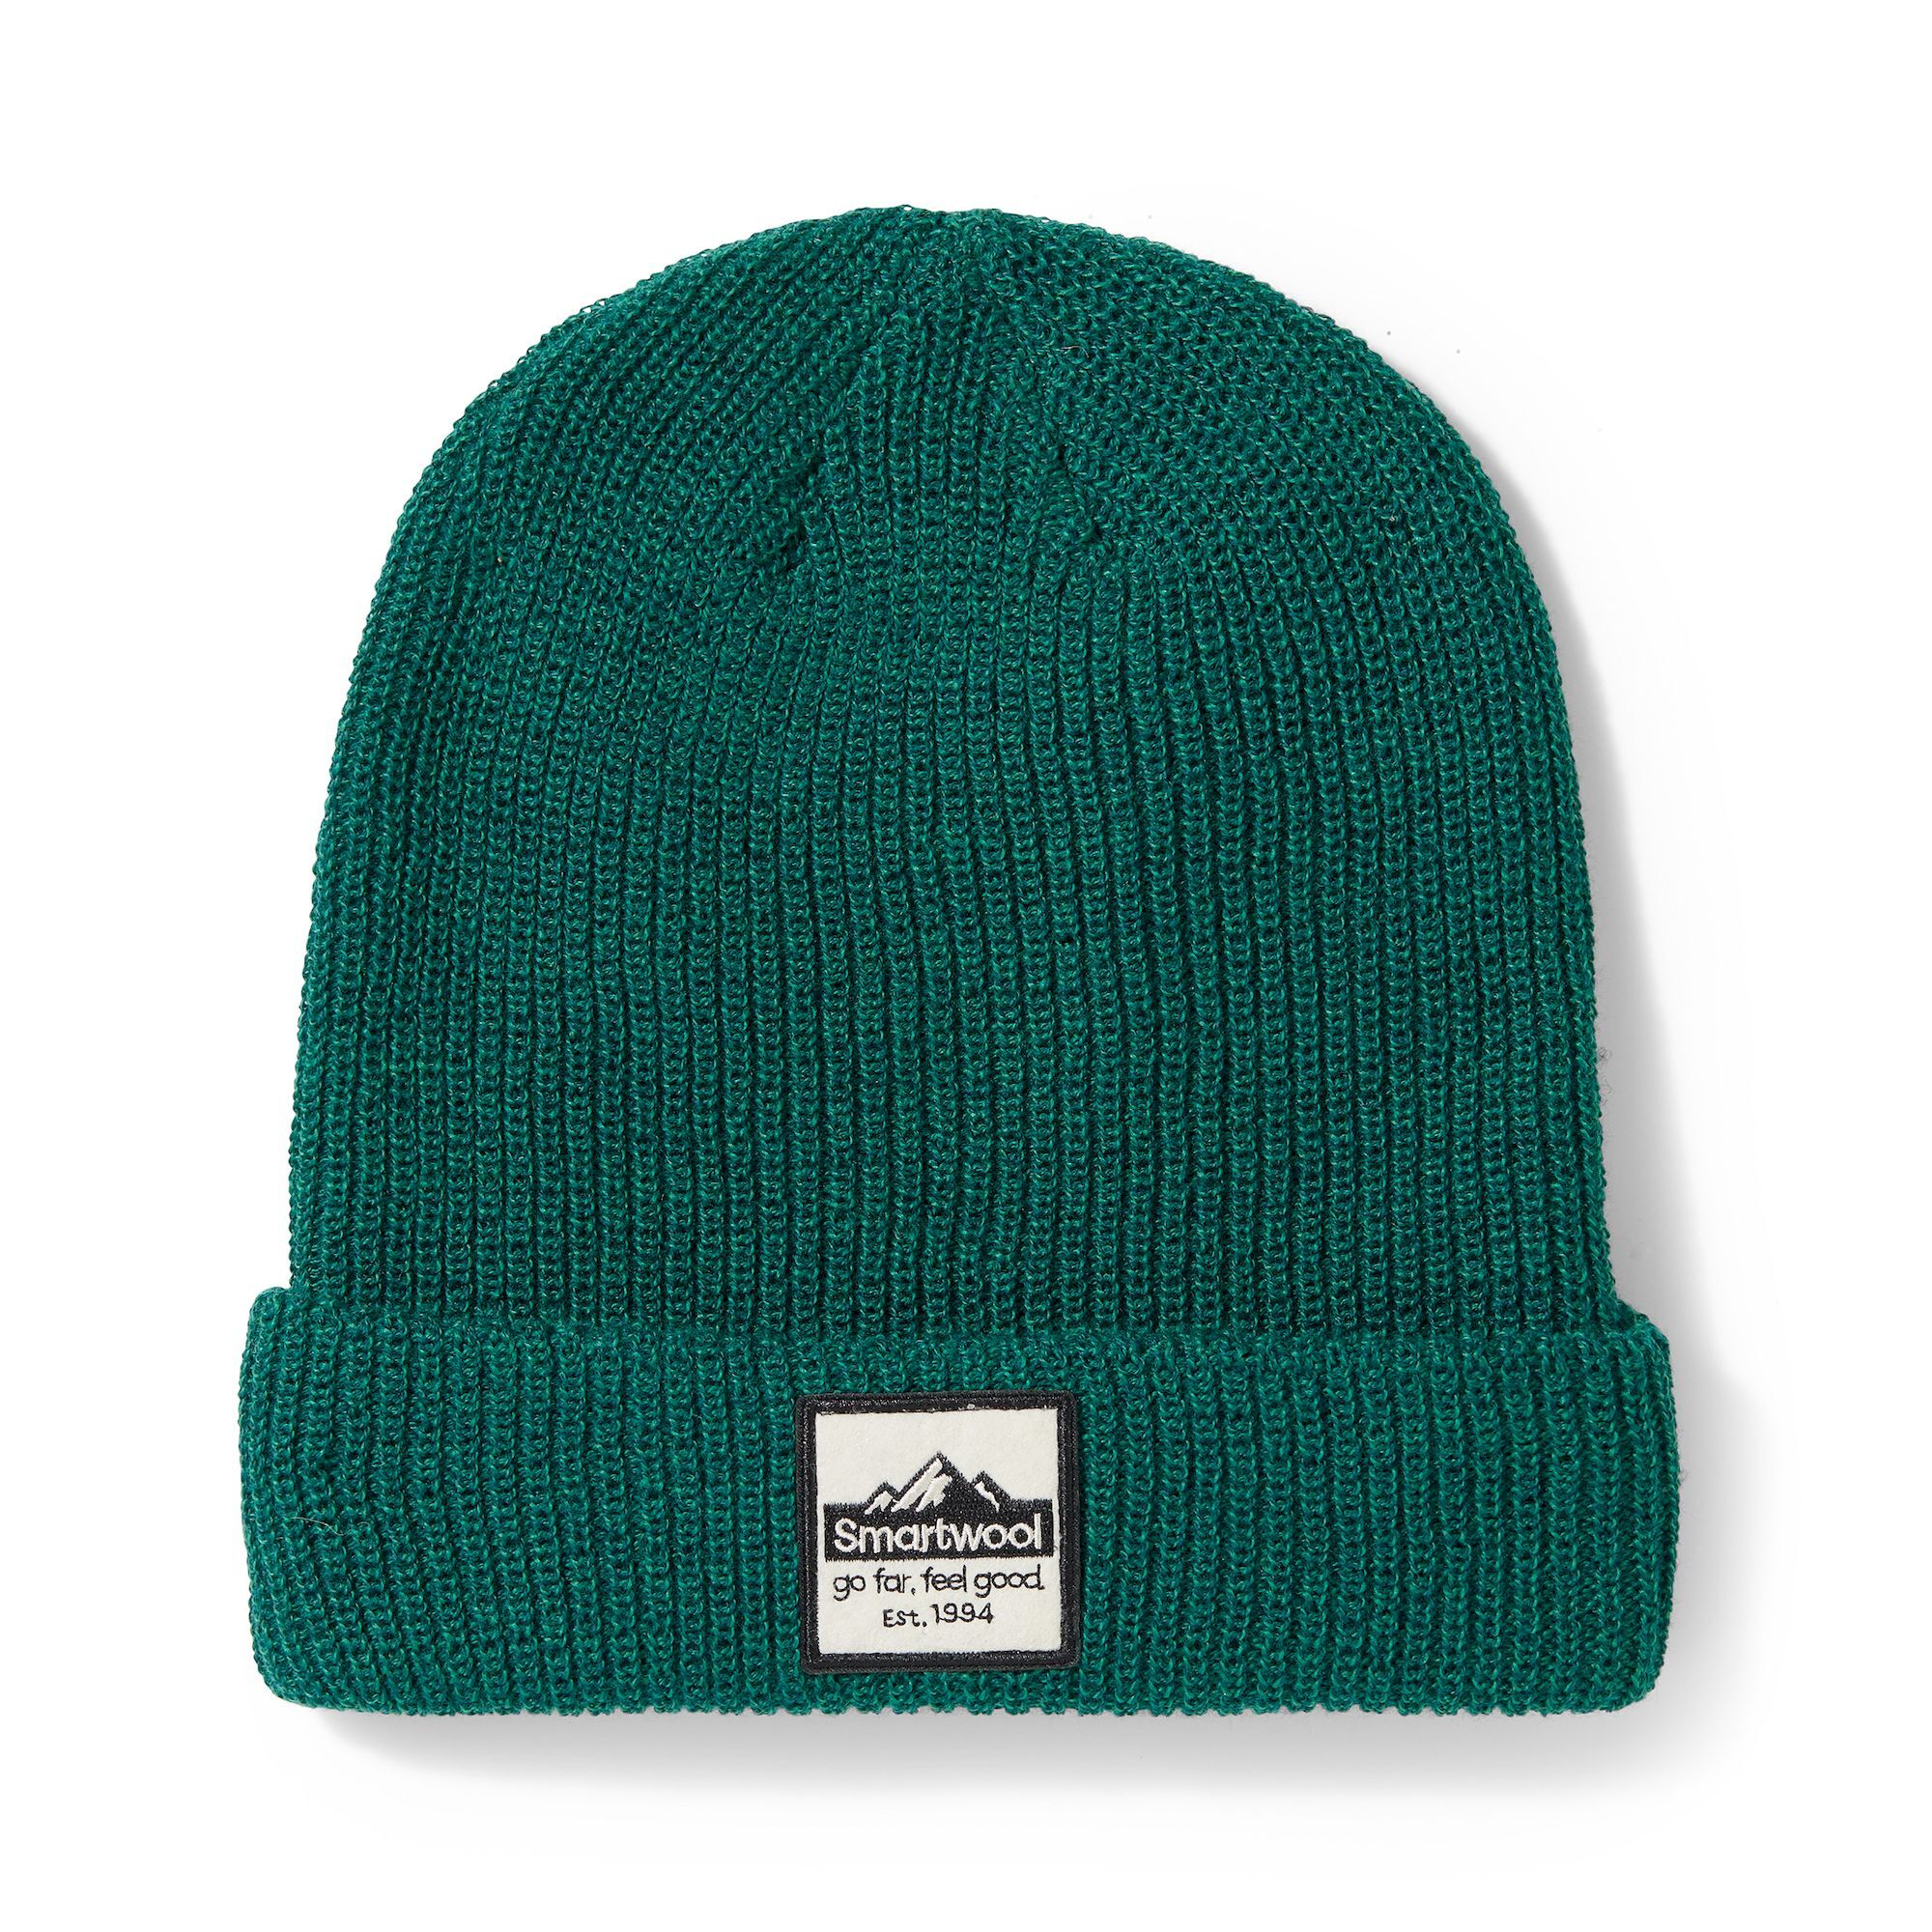 Smartwool Smartwool Patch Beanie - Berretto